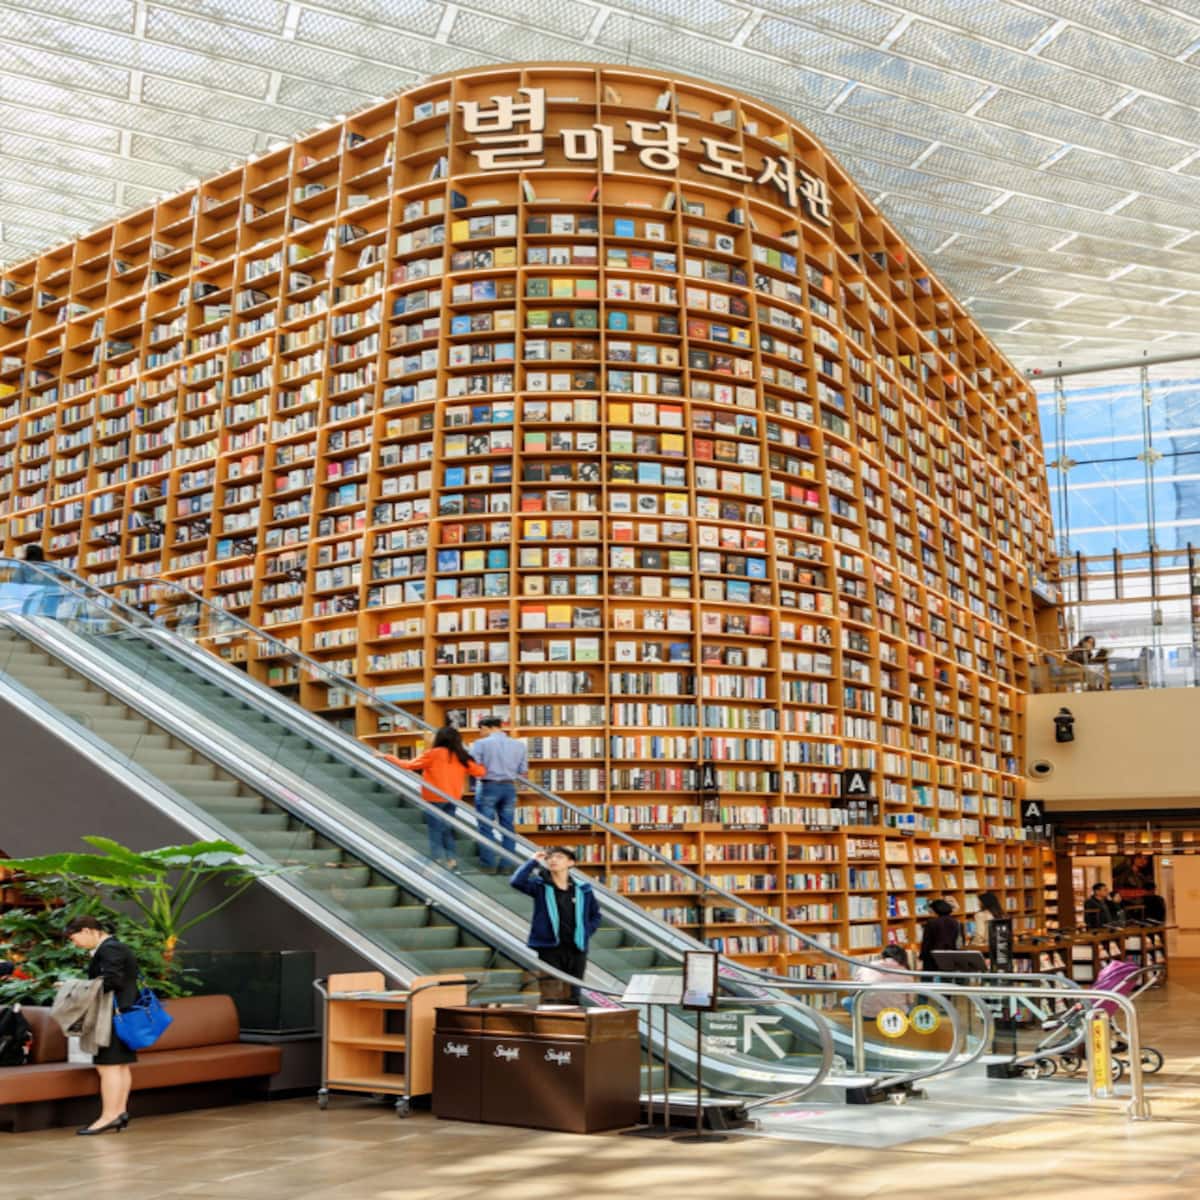 10 Biggest Libraries In The World- In Pics